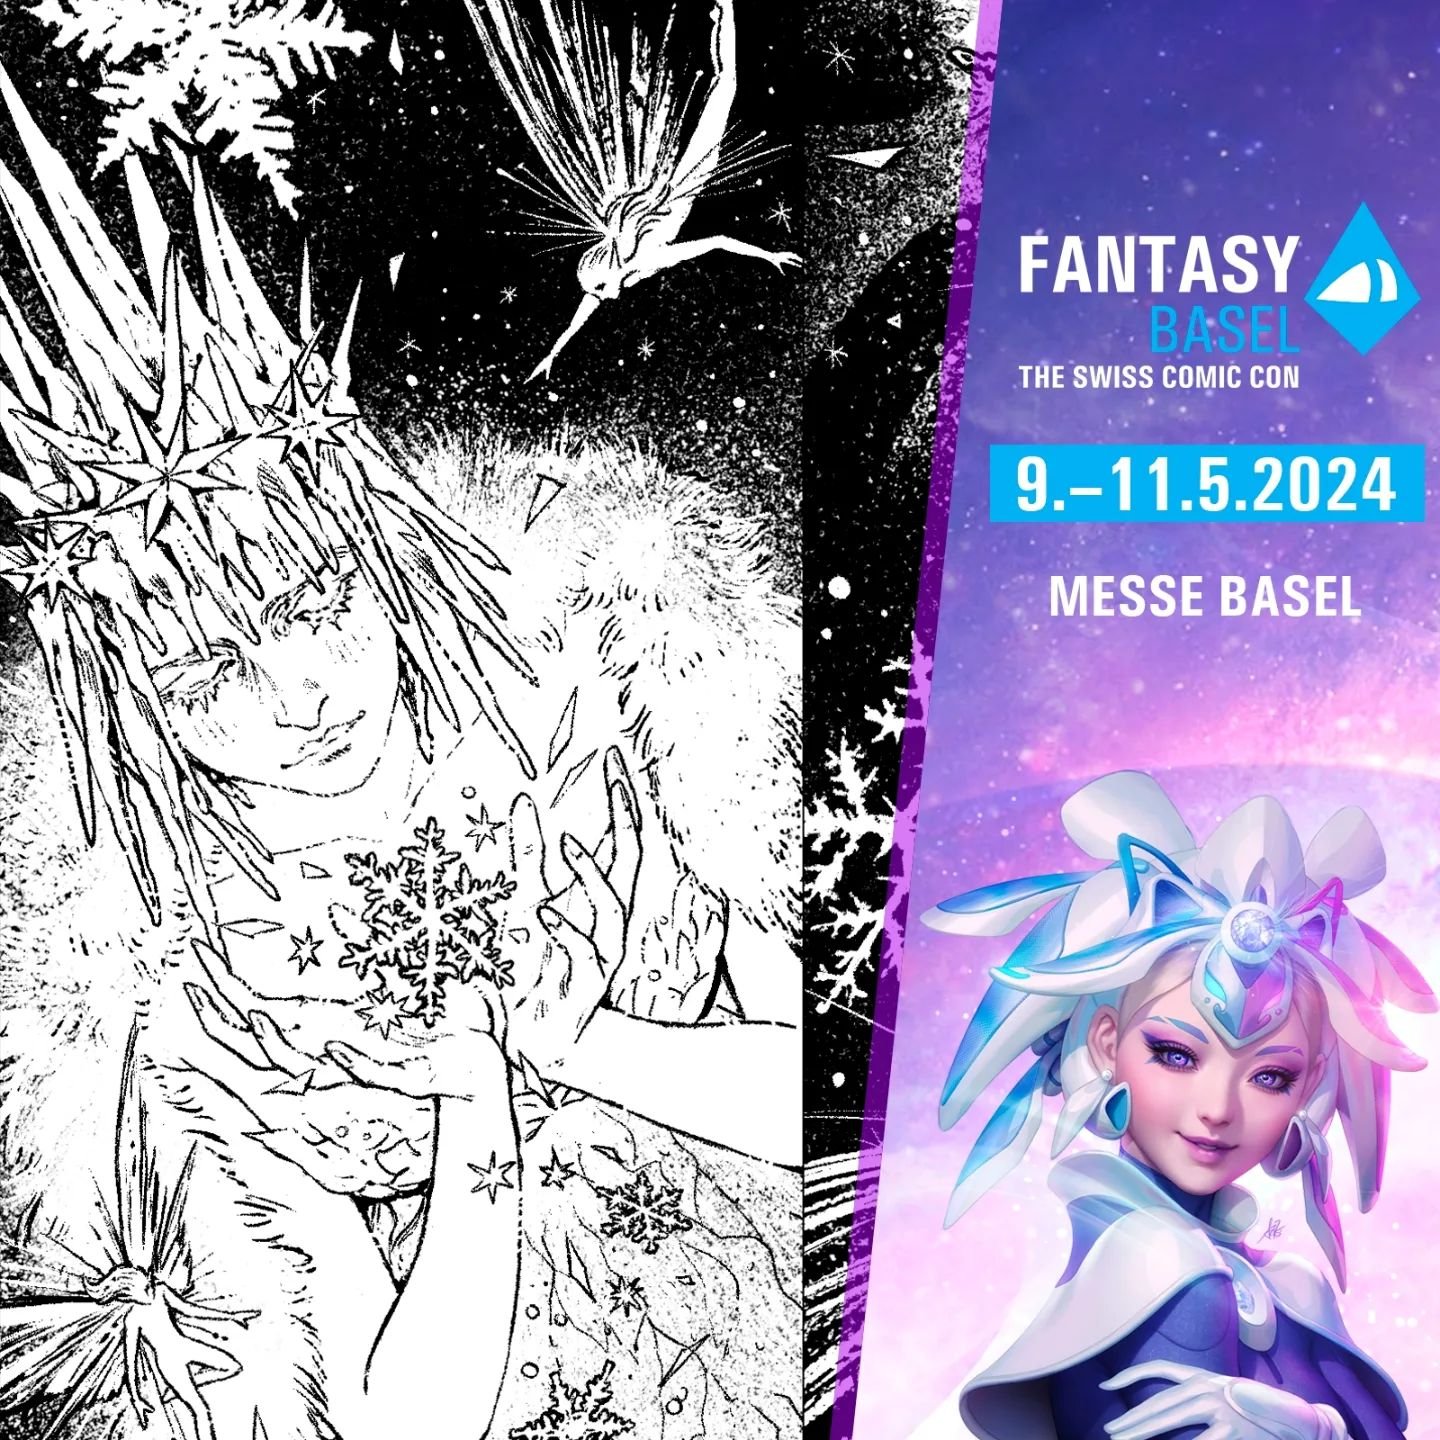 I'm happy to announce that I'll be at @fantasybasel !! 😊 You'll find me at booth n&deg;478 ! ✨️

Btw this is a visual for a bookmark that I'll be selling there.

#fantasybasel #fantasybasel2024 #booth #artistalley #icequeen #bookmark